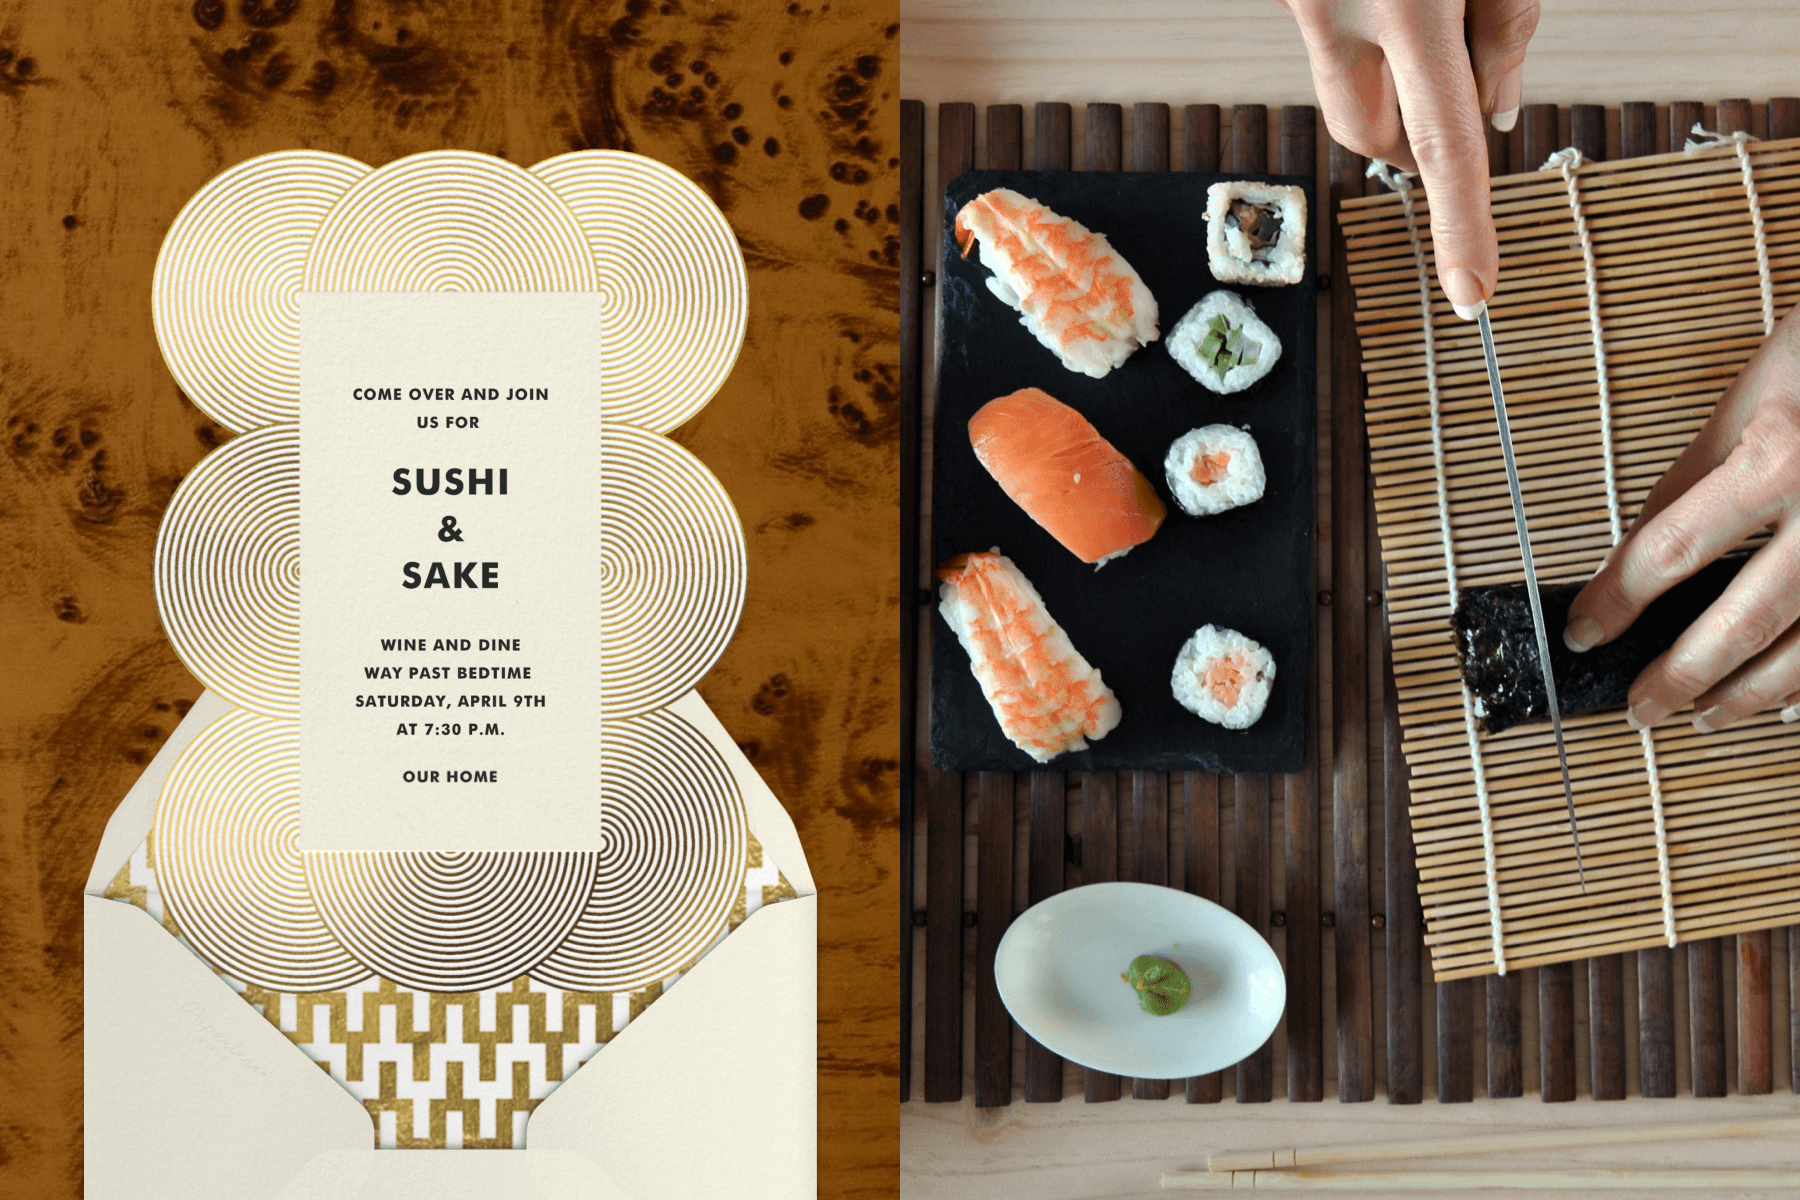 A die-cut invitation made of overlapping gold striped circles with a white rectangle in the center; hands slice a sushi roll with more sushi nearby.